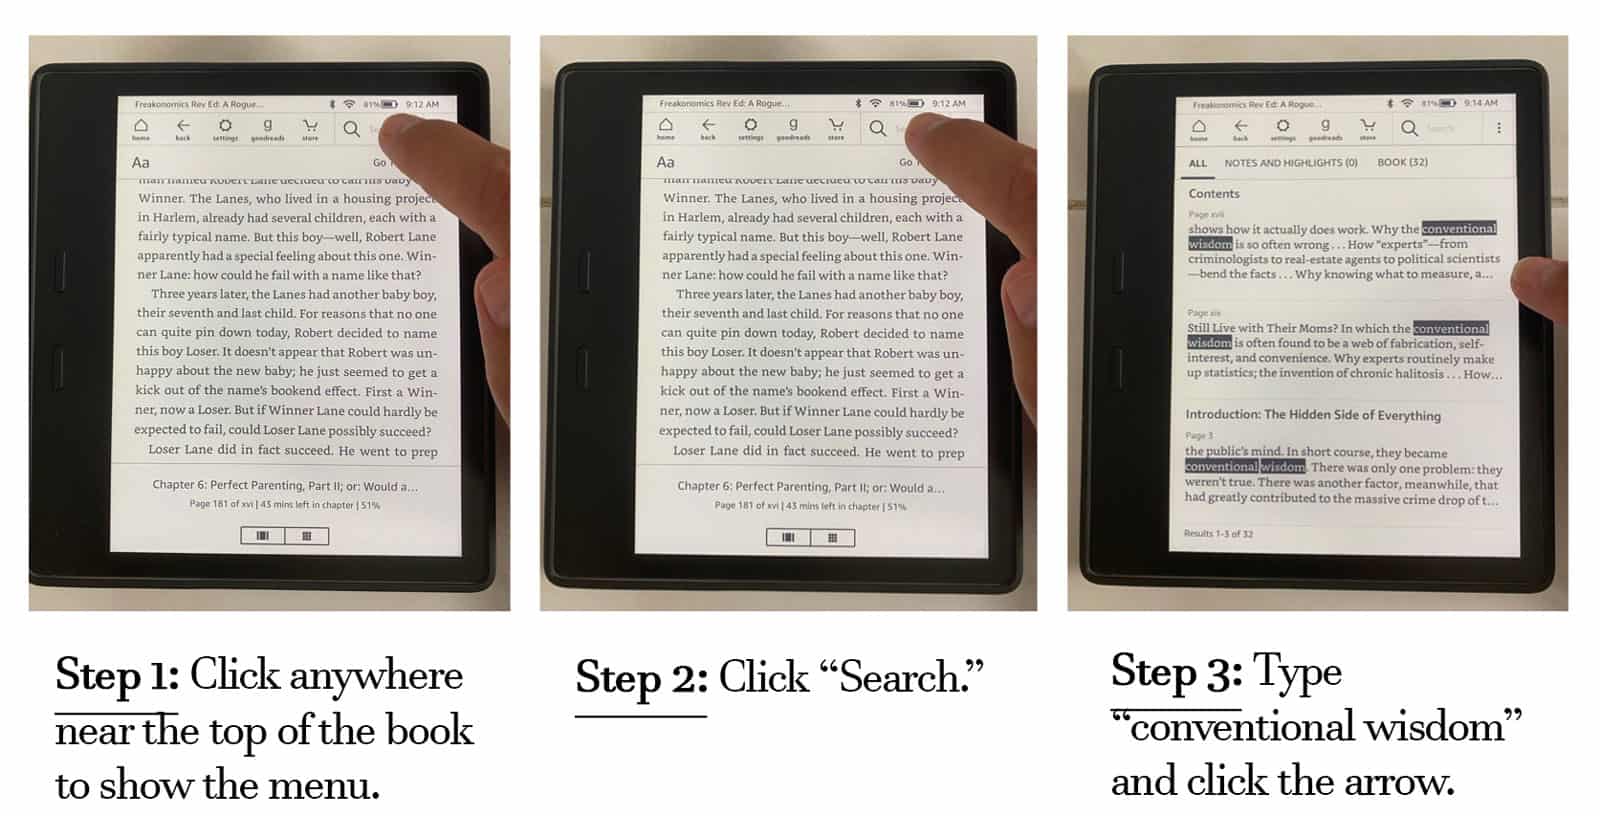 How to Search on an Amazon Kindle